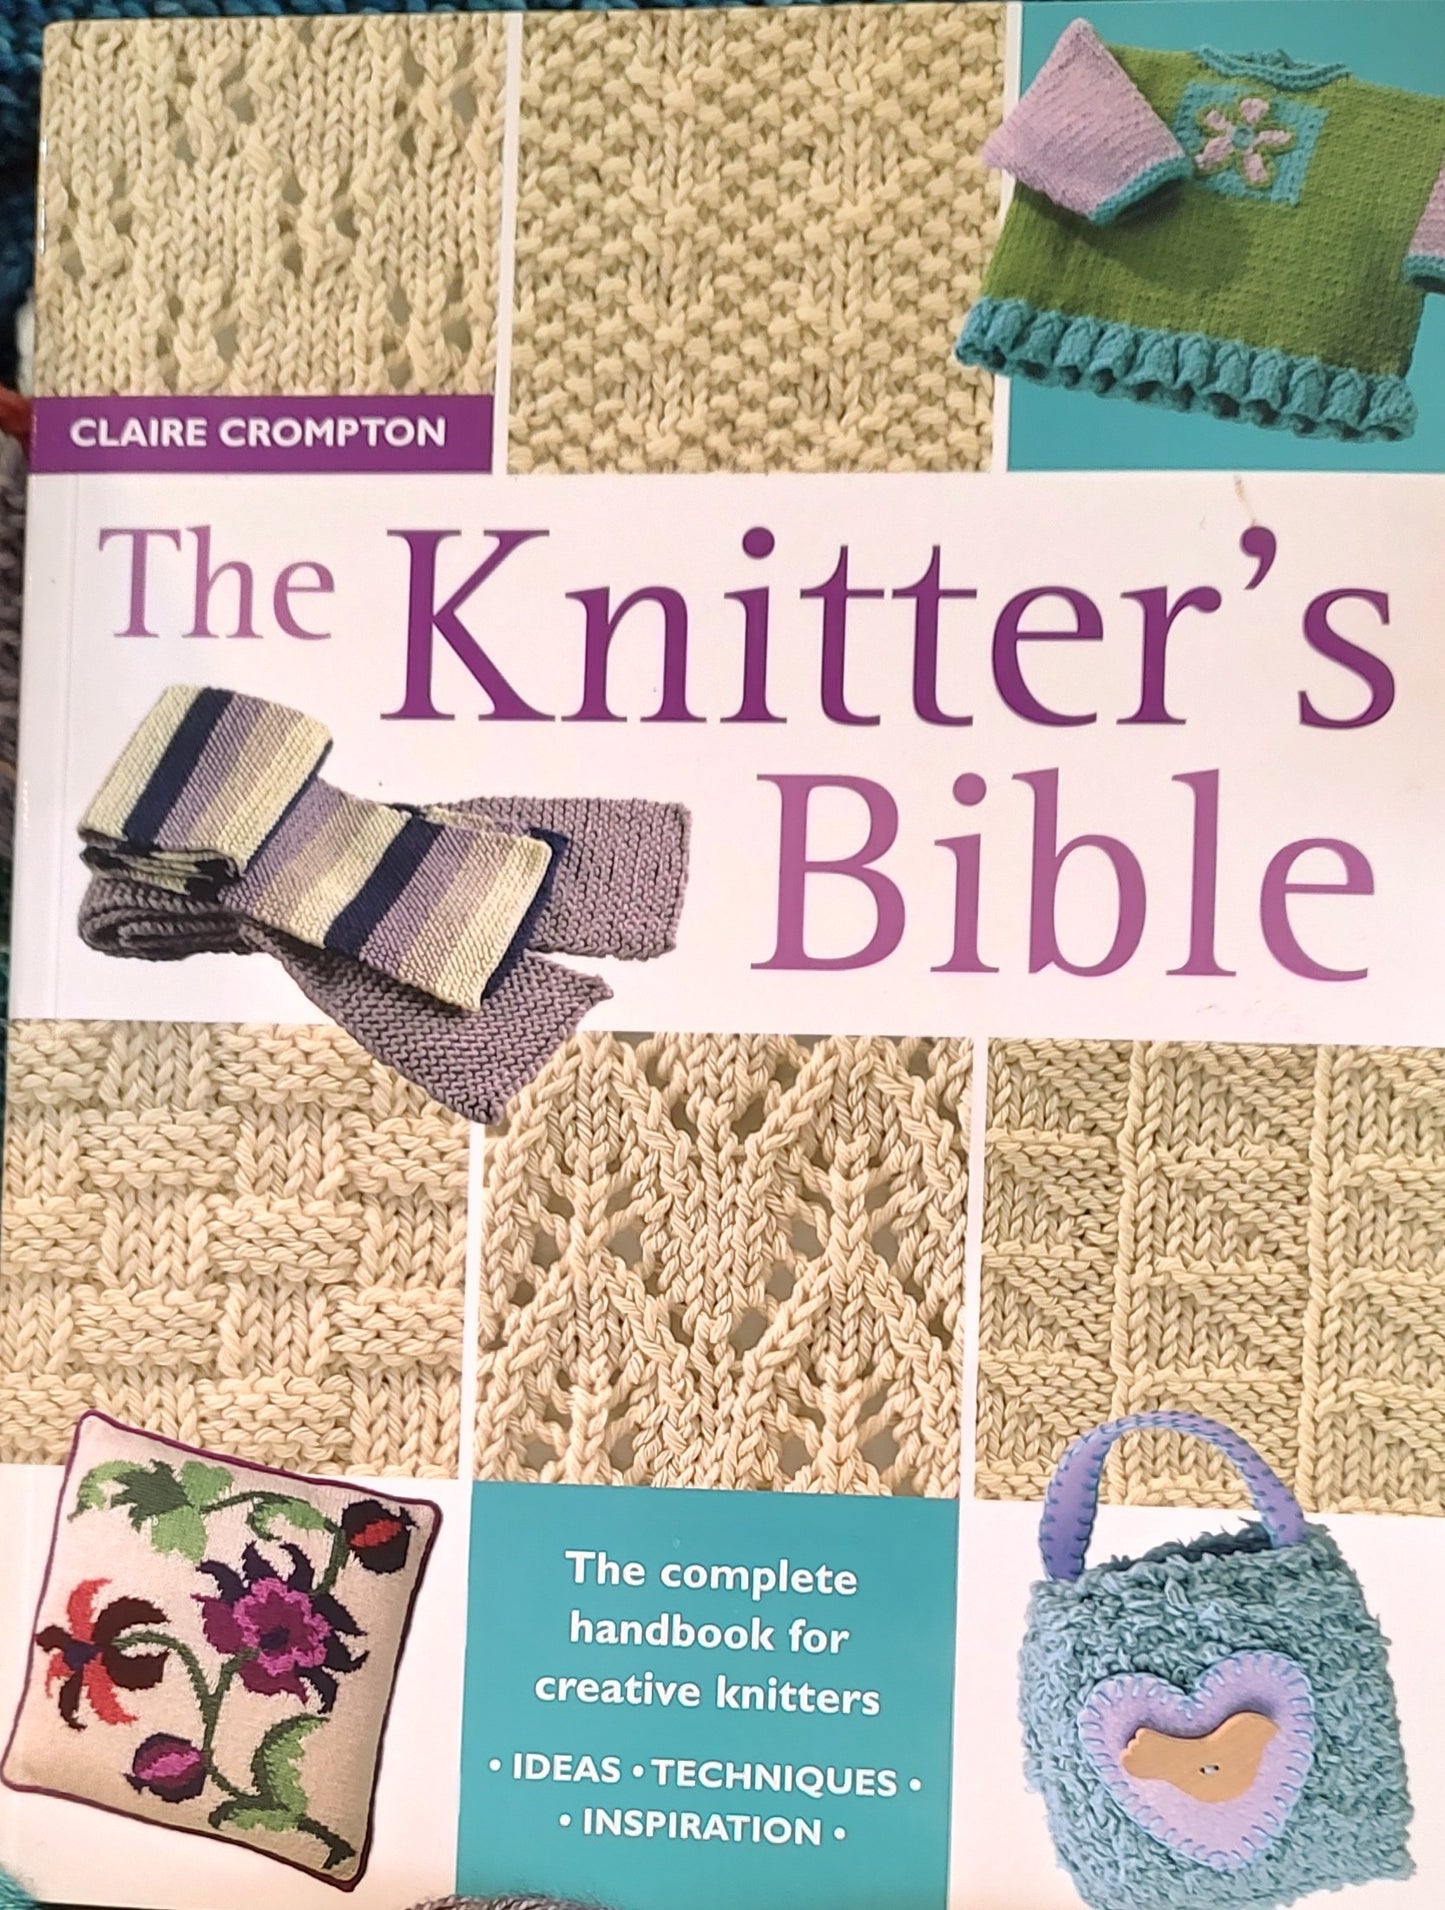 Book - The Knitter's Bible